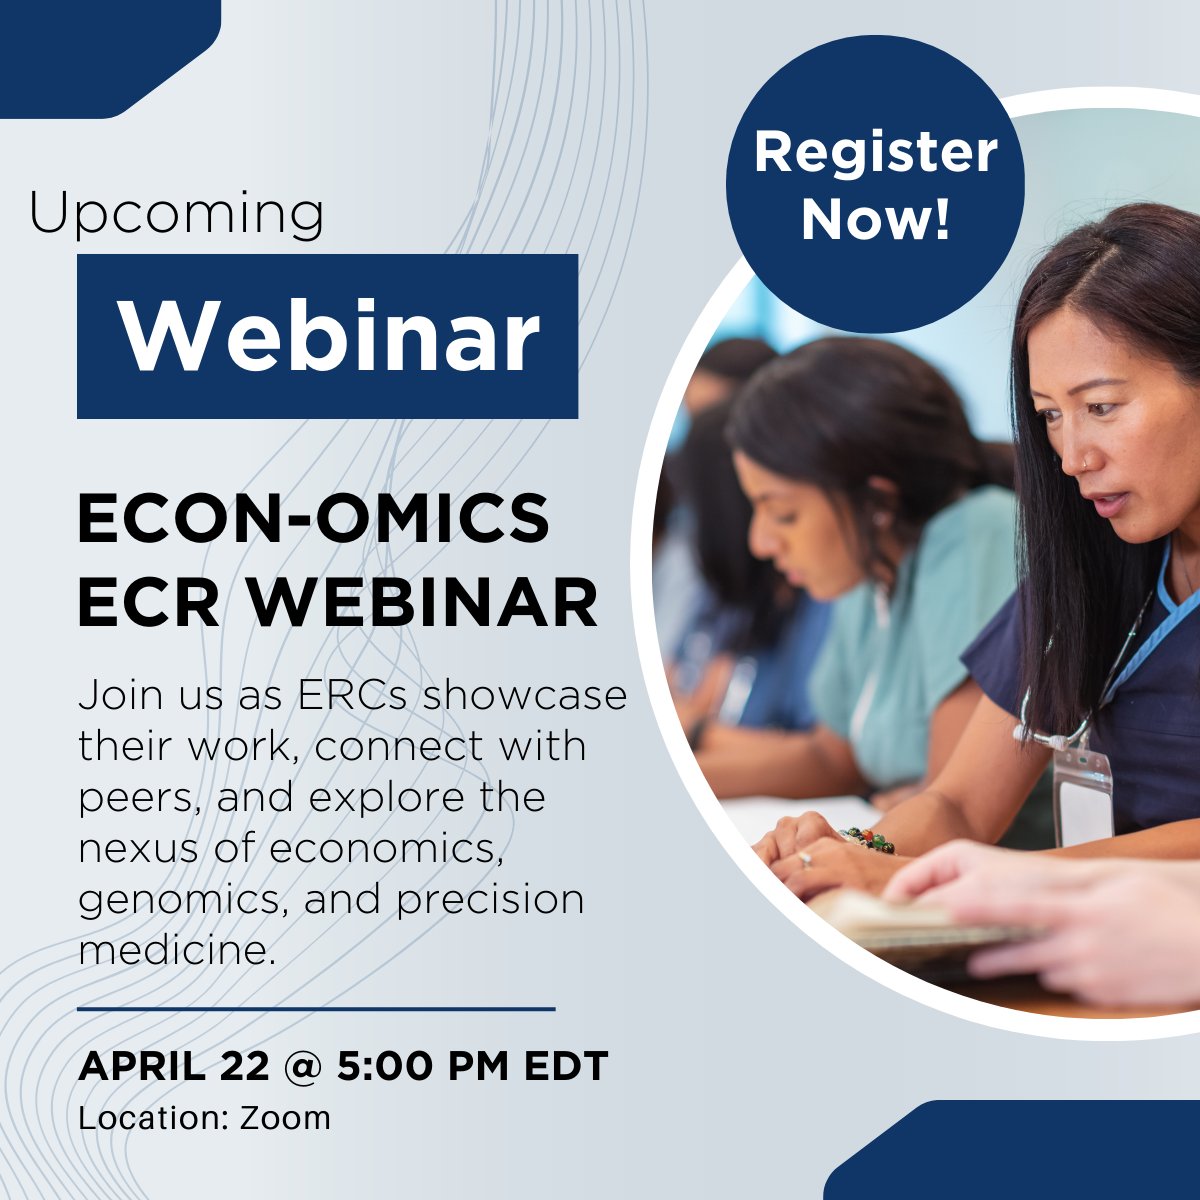 We welcome all ECRs to join us on April 22 at 5:00PM EDT for Econ-Omics ECR Webinar! To learn more about the topics, speakers, and to register visit: healtheconomics.org/event/econ-omi…